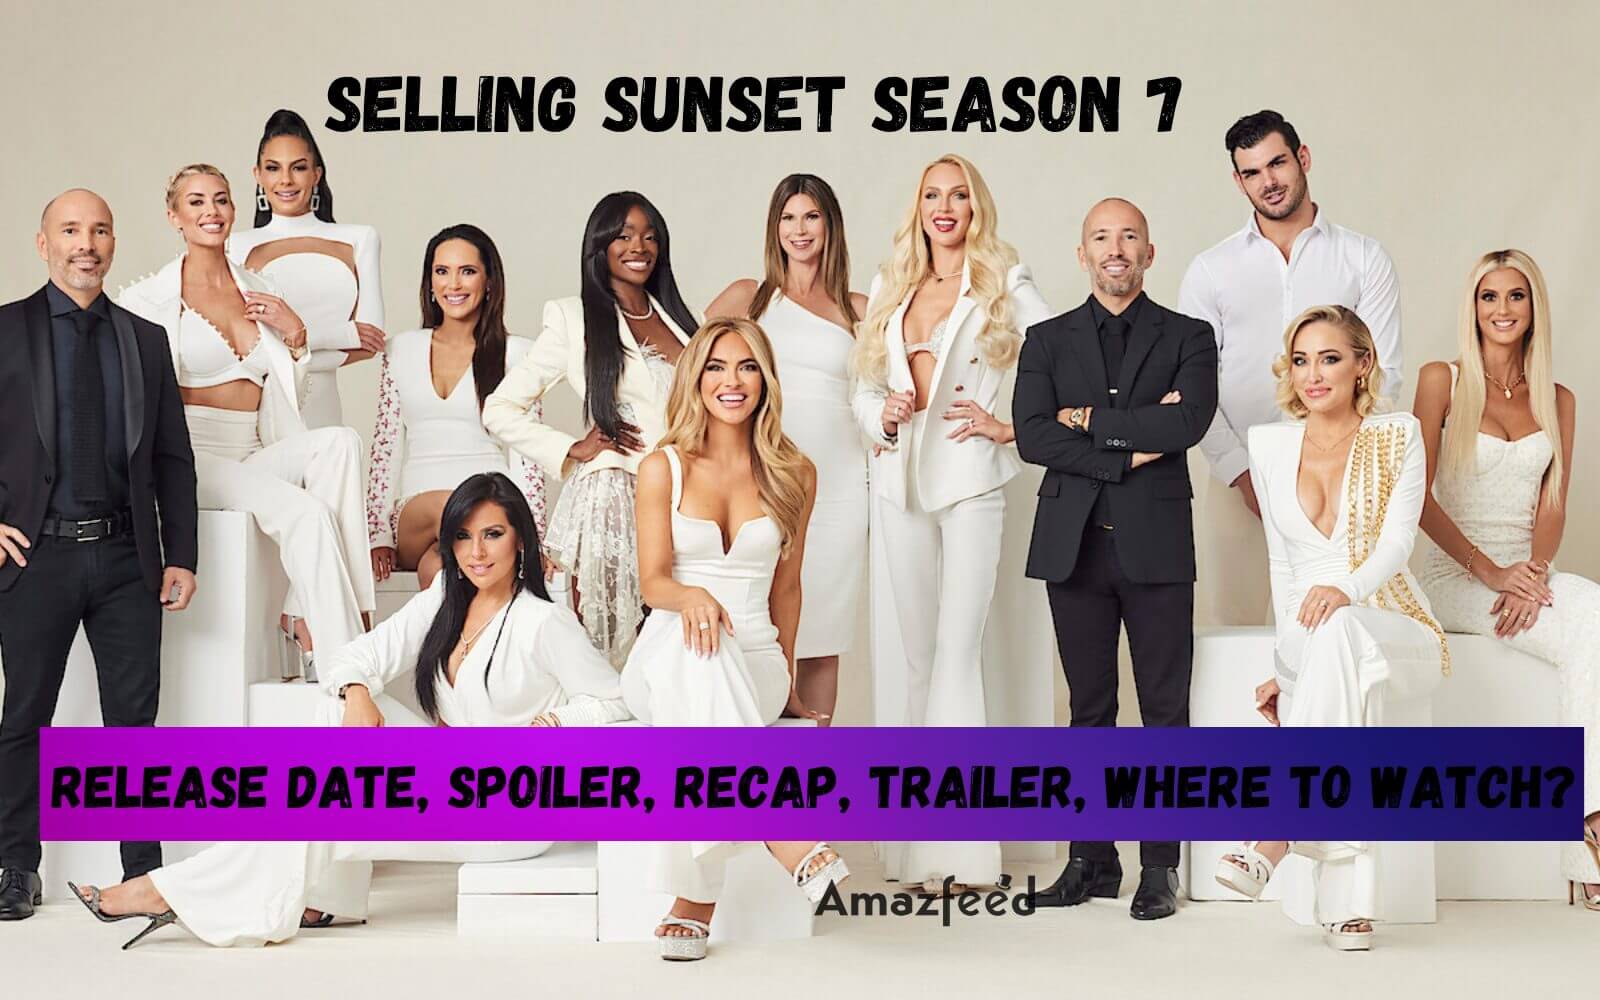 Selling Sunset' Season 7: Release date, trailer, how to watch